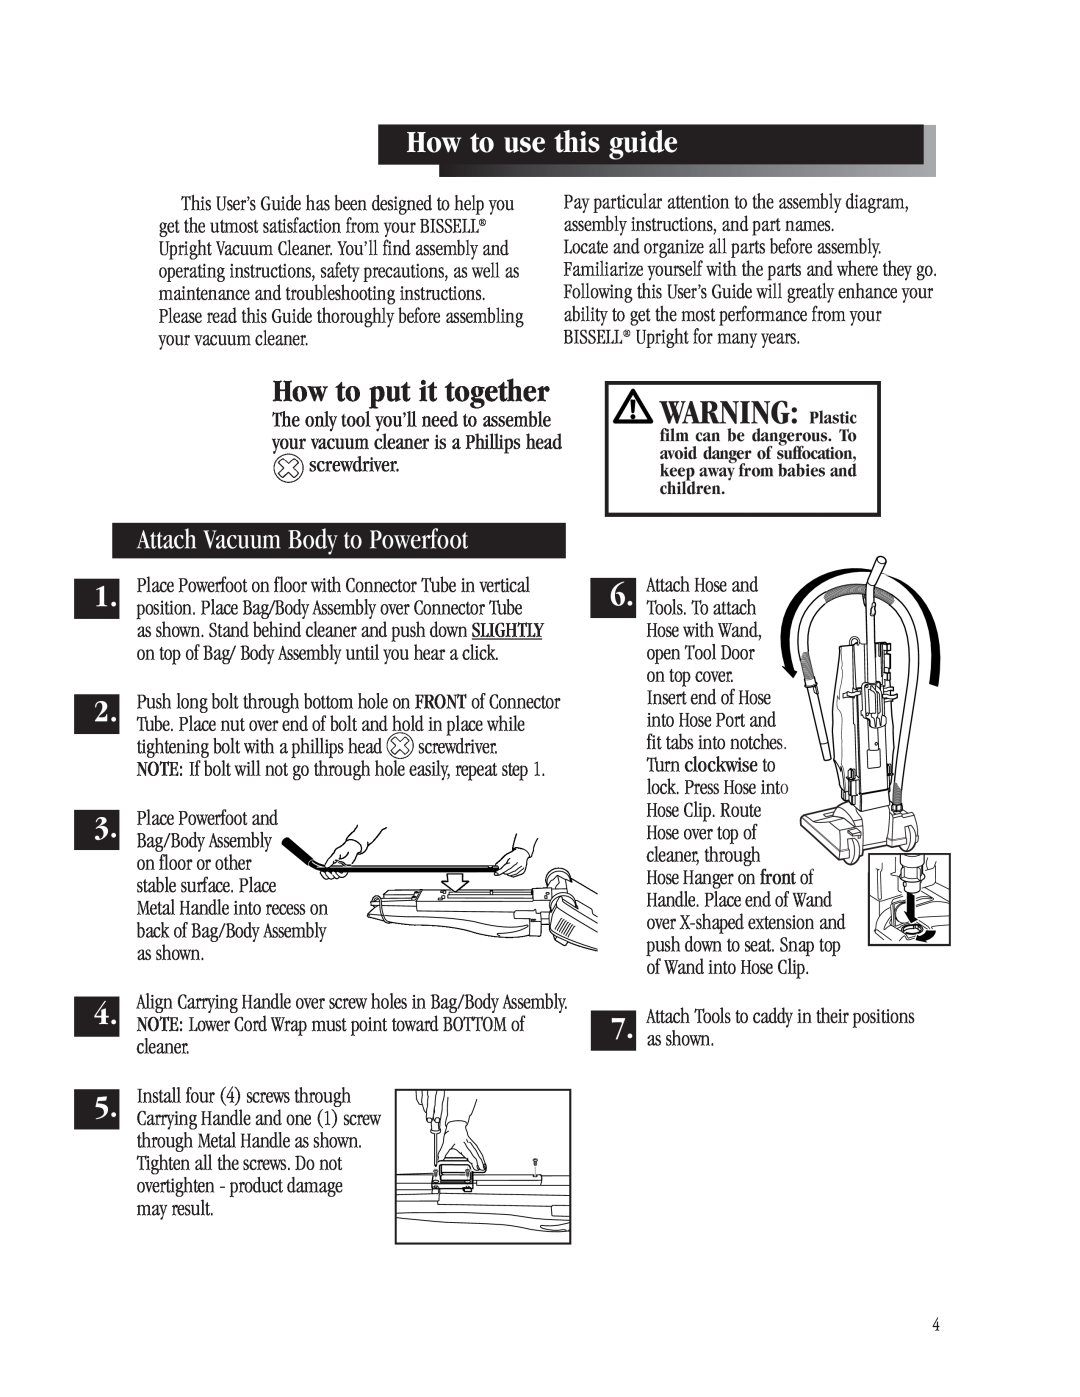 Bissell 3512-5 warranty WARNING Plastic, How to use this guide, How to put it together, Attach Vacuum Body to Powerfoot 